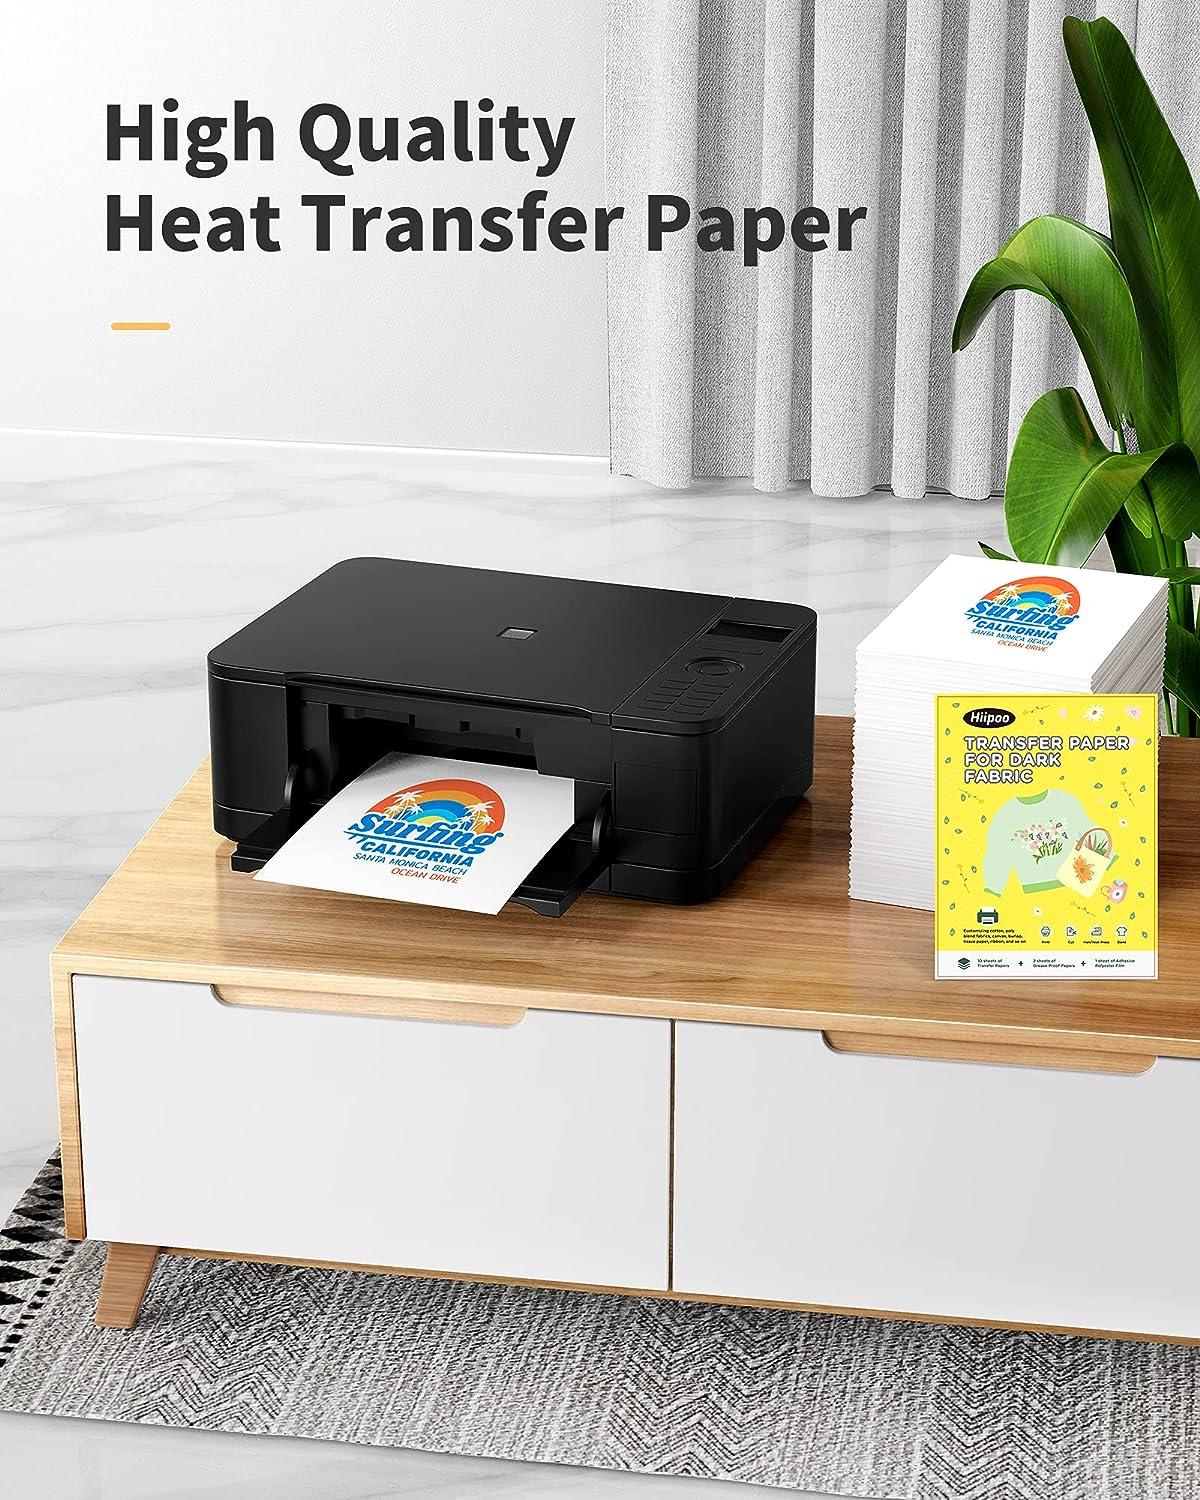 Hiipoo Heat Transfer Paper 8.5x11 Iron-on Transfer Paper for T